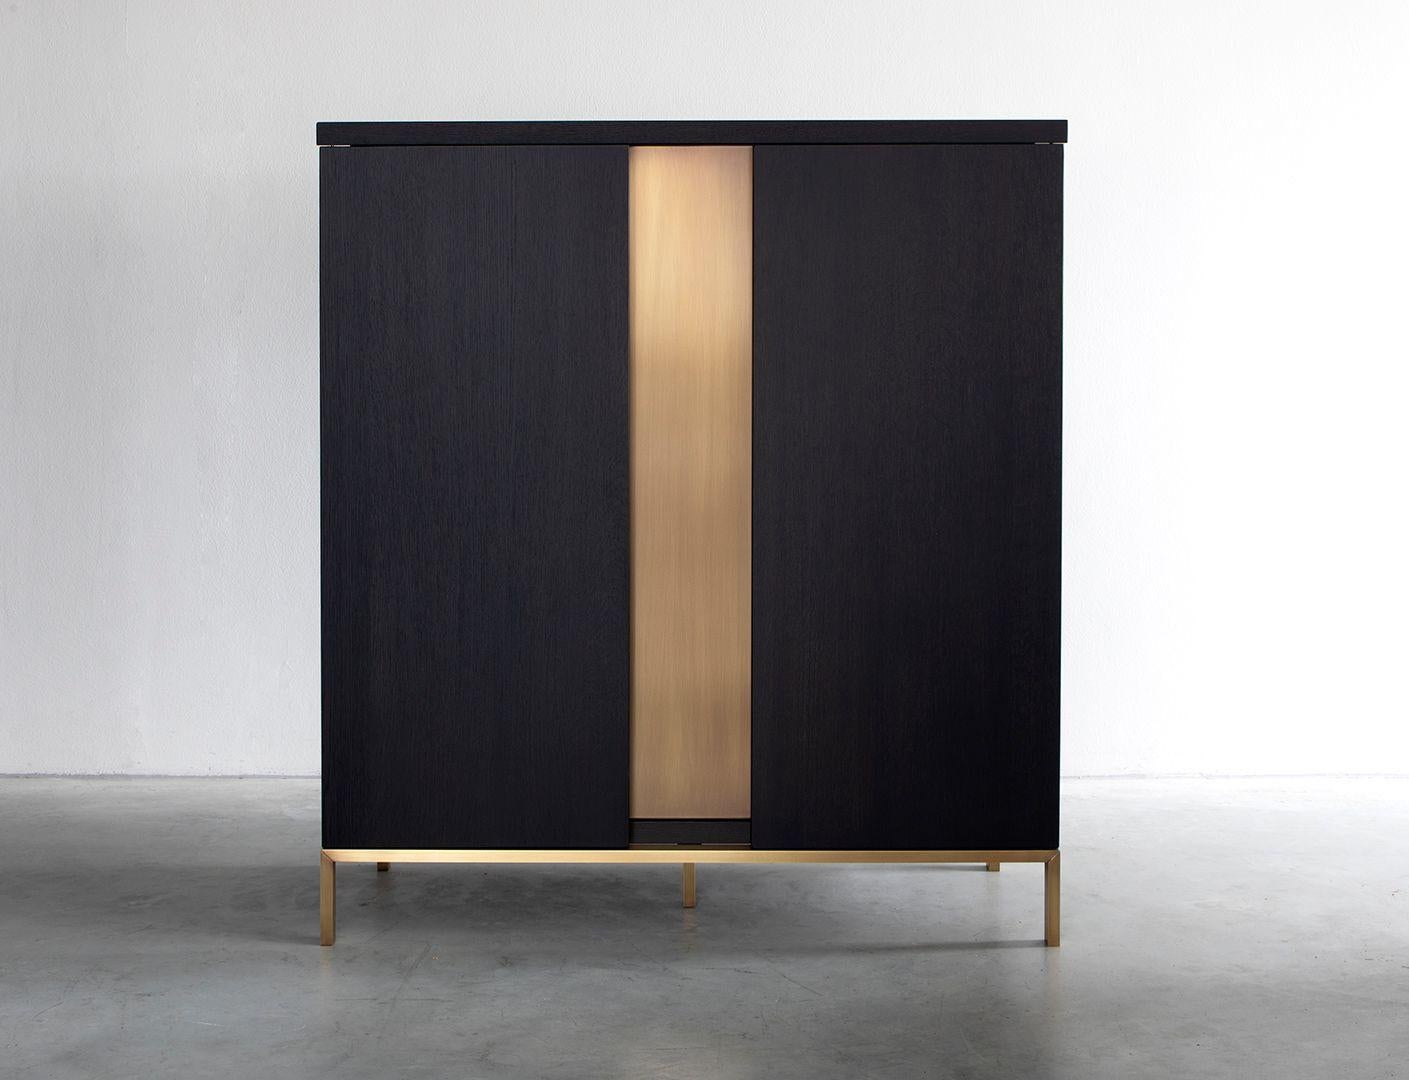 Nota Bene cabinet by Van Rossum
Dimensions: D120 x W50 x H136 cm
Materials: Oak, brass.

The wood is available in all standard Van Rossum colors, or in a matching finish to customer’s own sample.
Detailing is available in stainless steel or